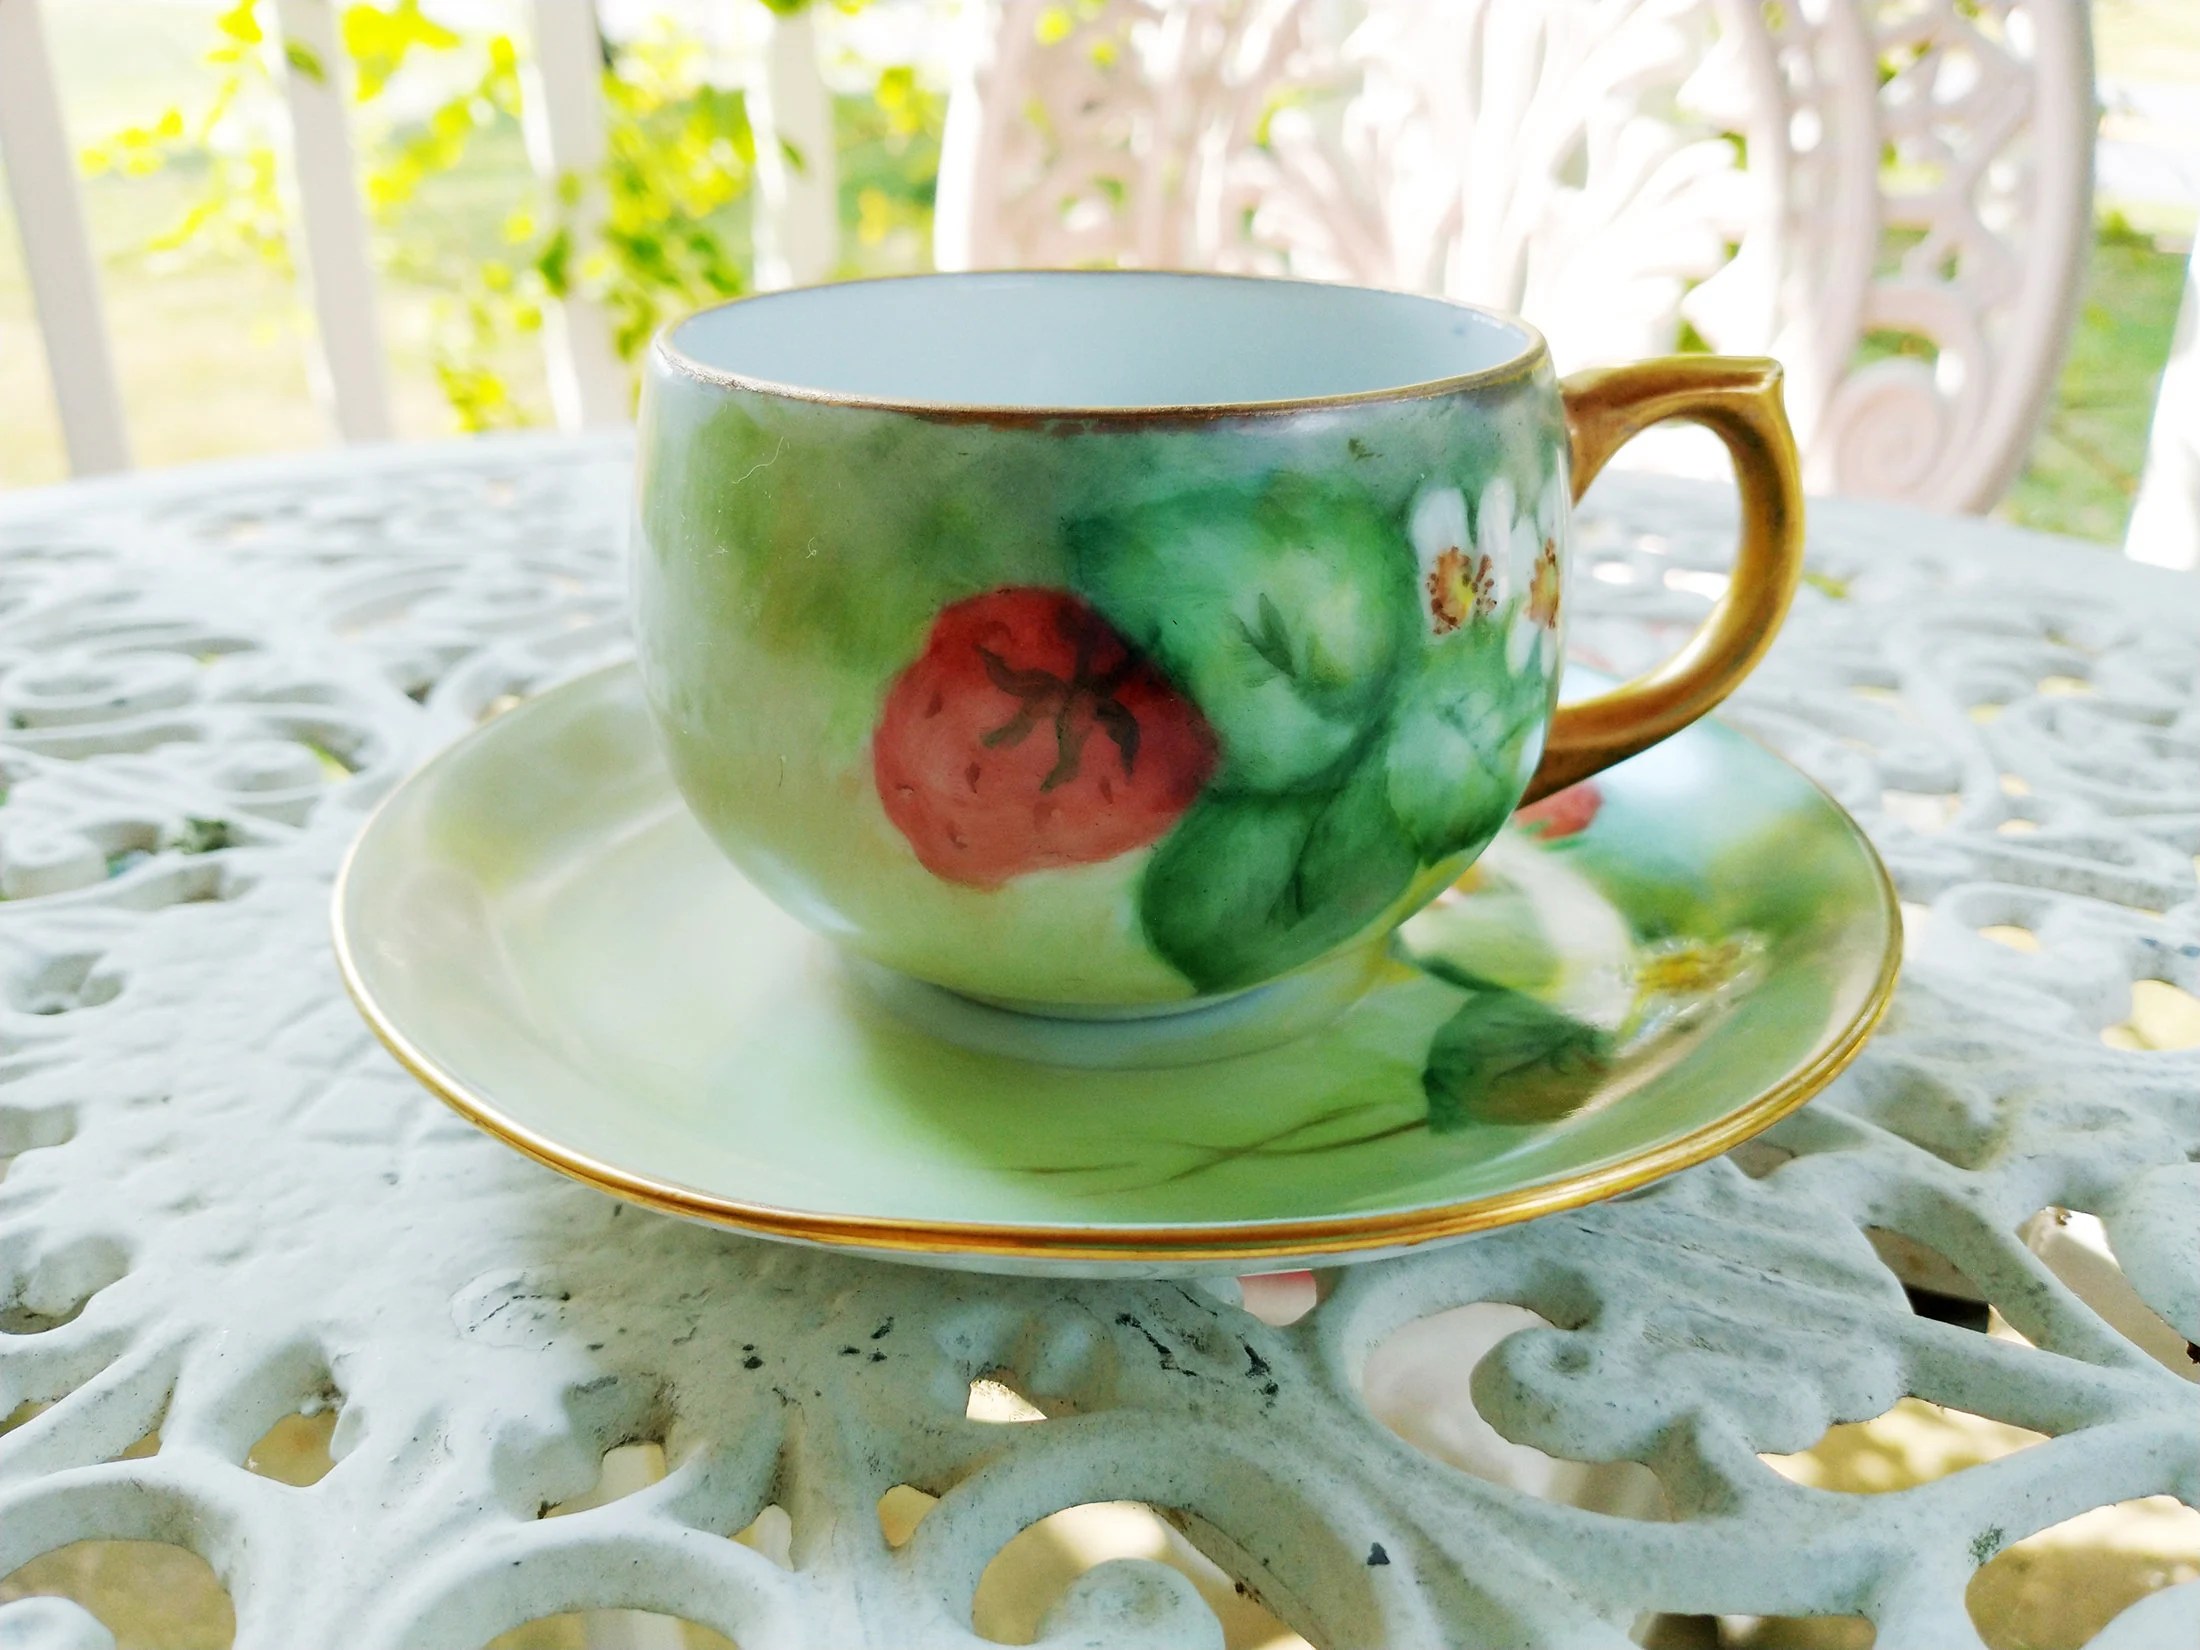 Hand Painted Strawberry Flower China Tea Cup & Saucer Set - Vintage, Farmhouse, Country, Cottage, Floral, Fruit, Strawberries, Porcelain